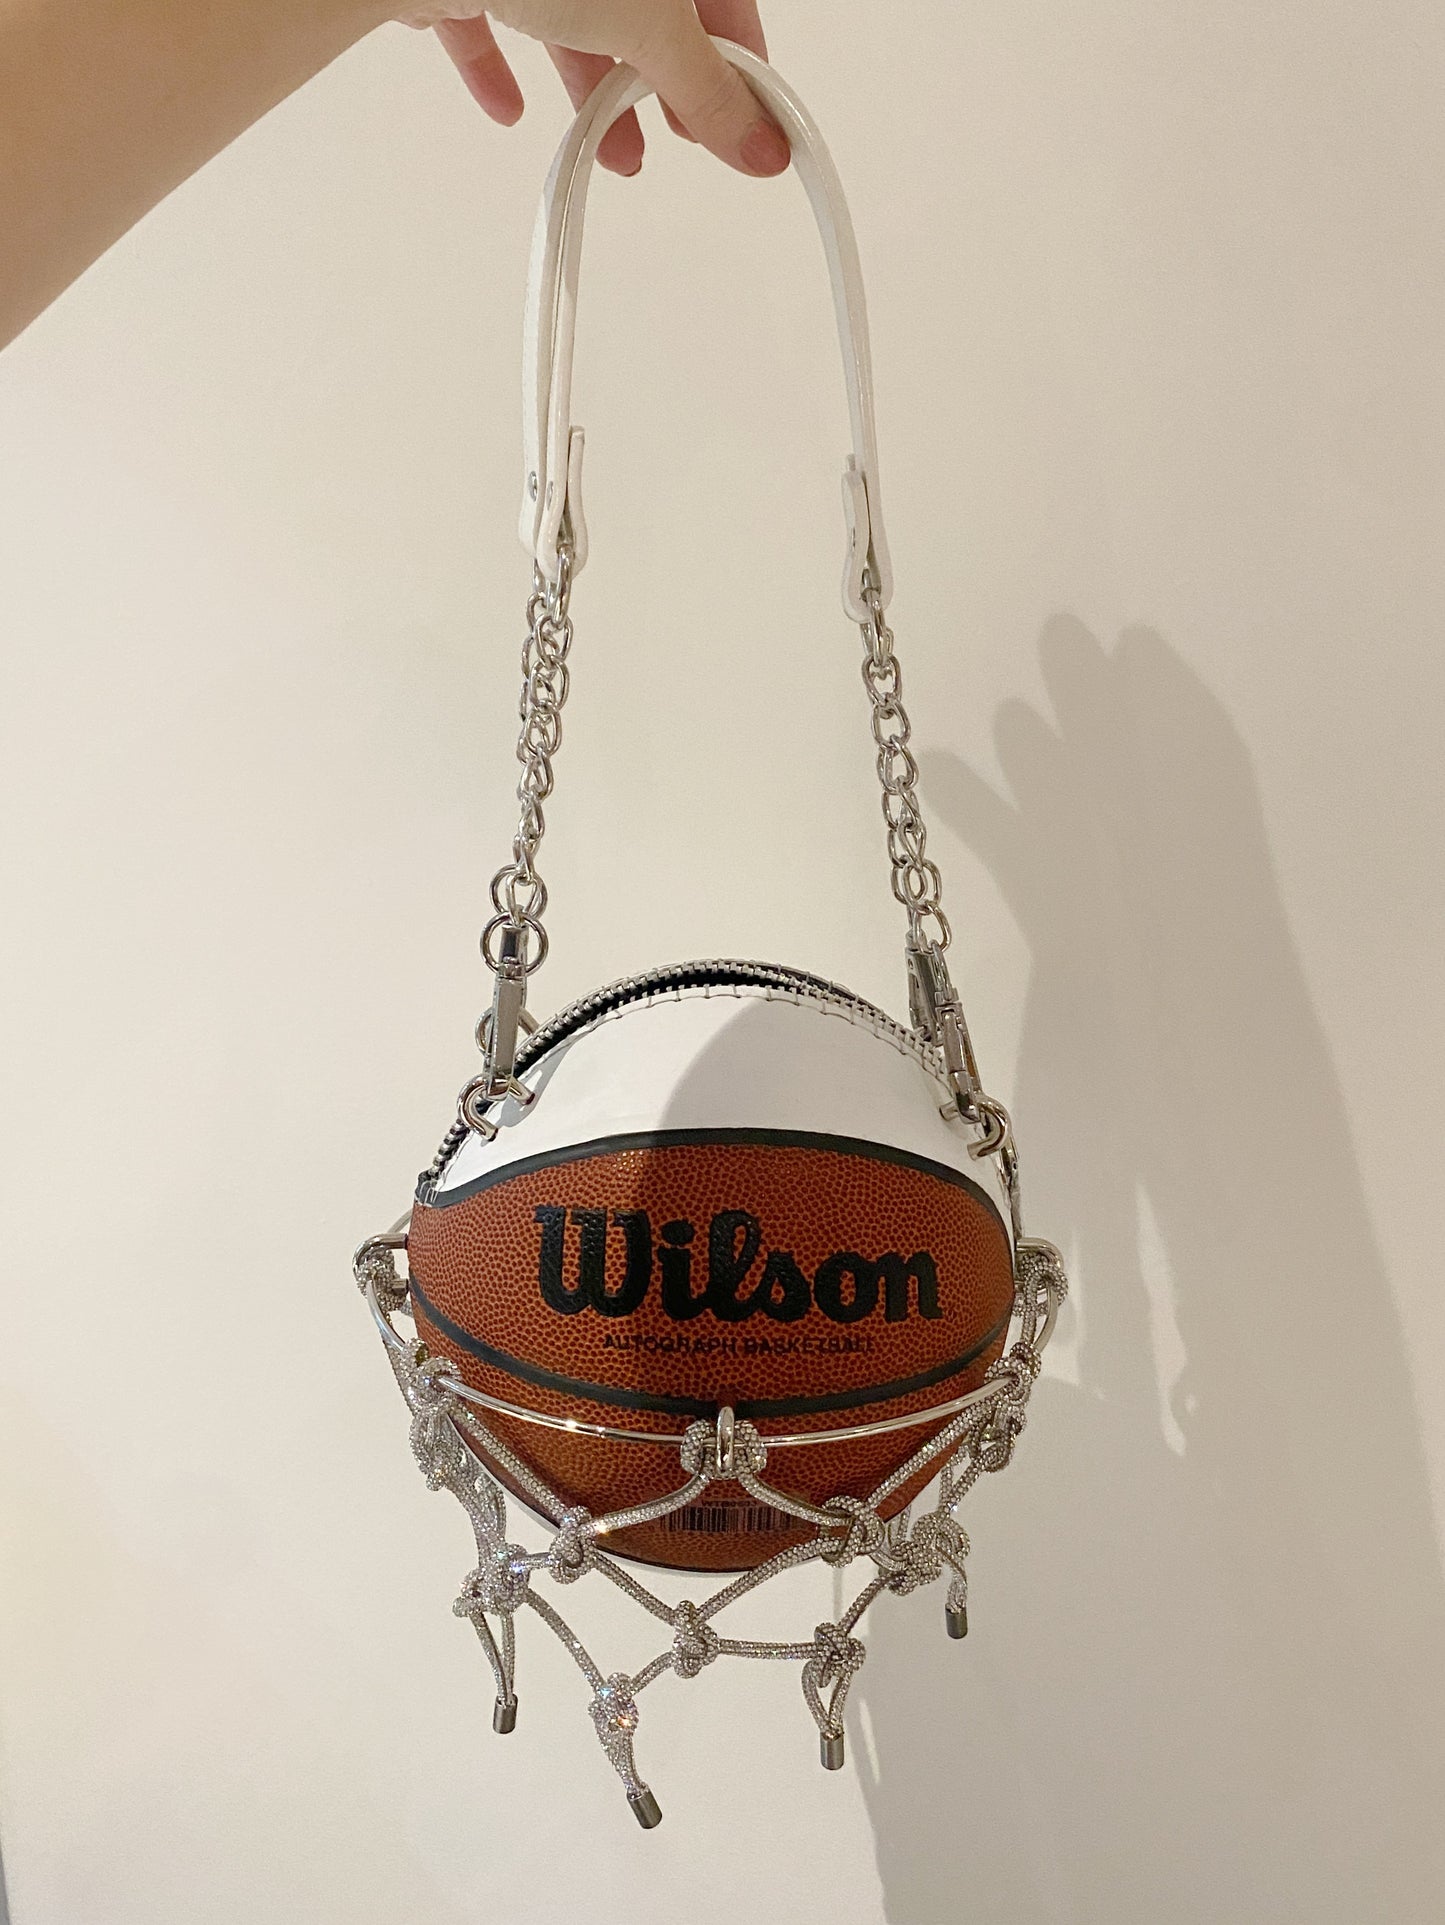 Exclusive Hand-Made WILSON White/Brown Autograph Basketball purse